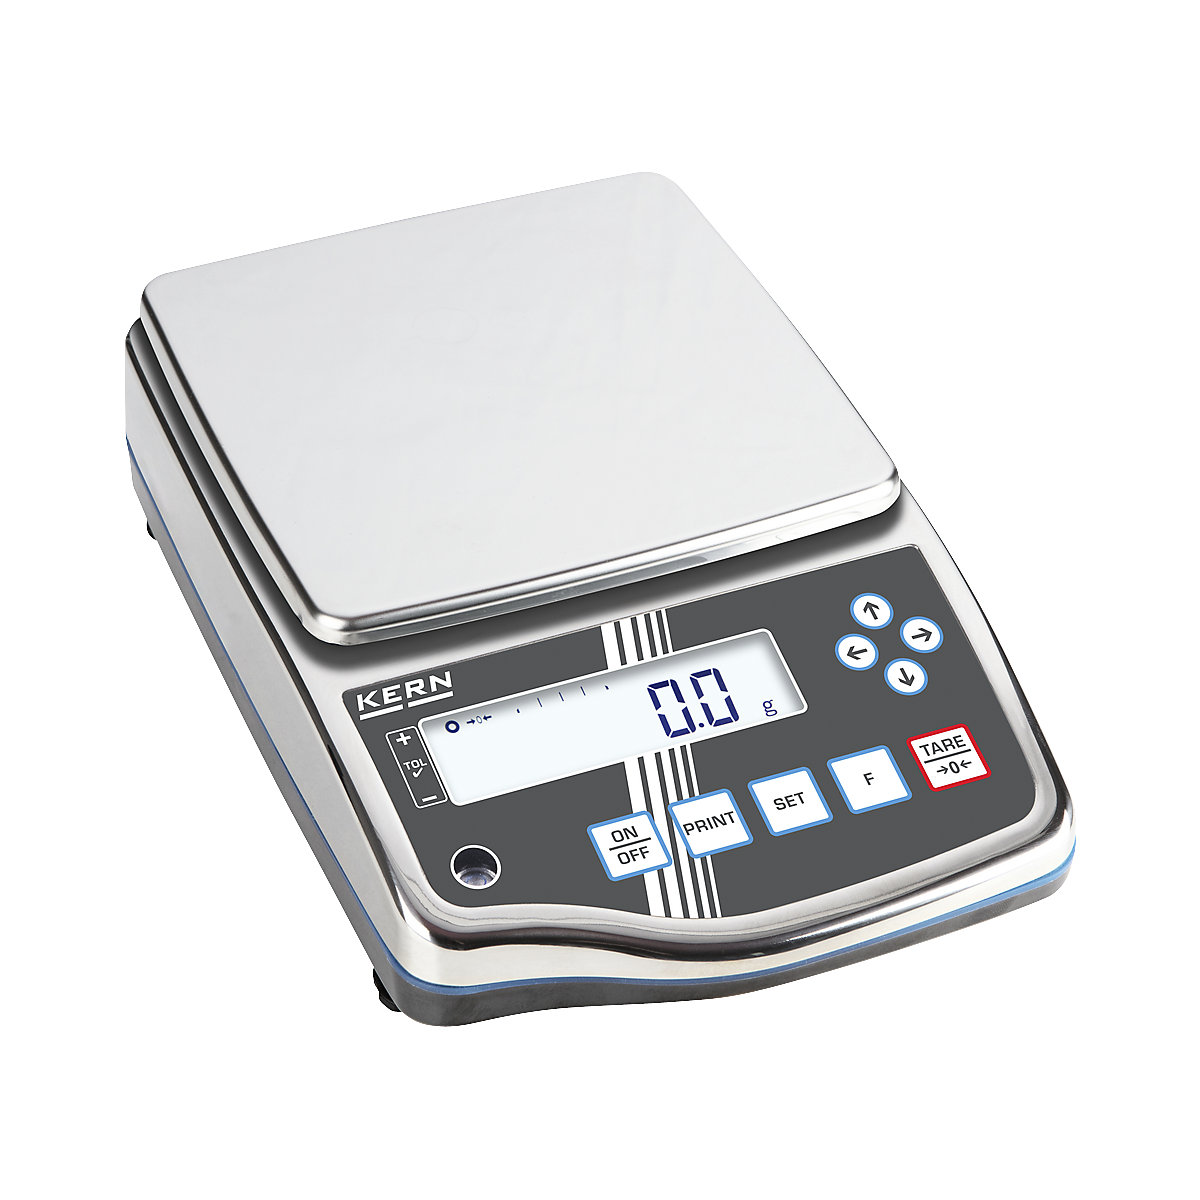 Precision scales, high resolution, weighing range up to 8.2 kg, read-out accuracy 0.1 g, weighing plate 190 x 190 mm-1